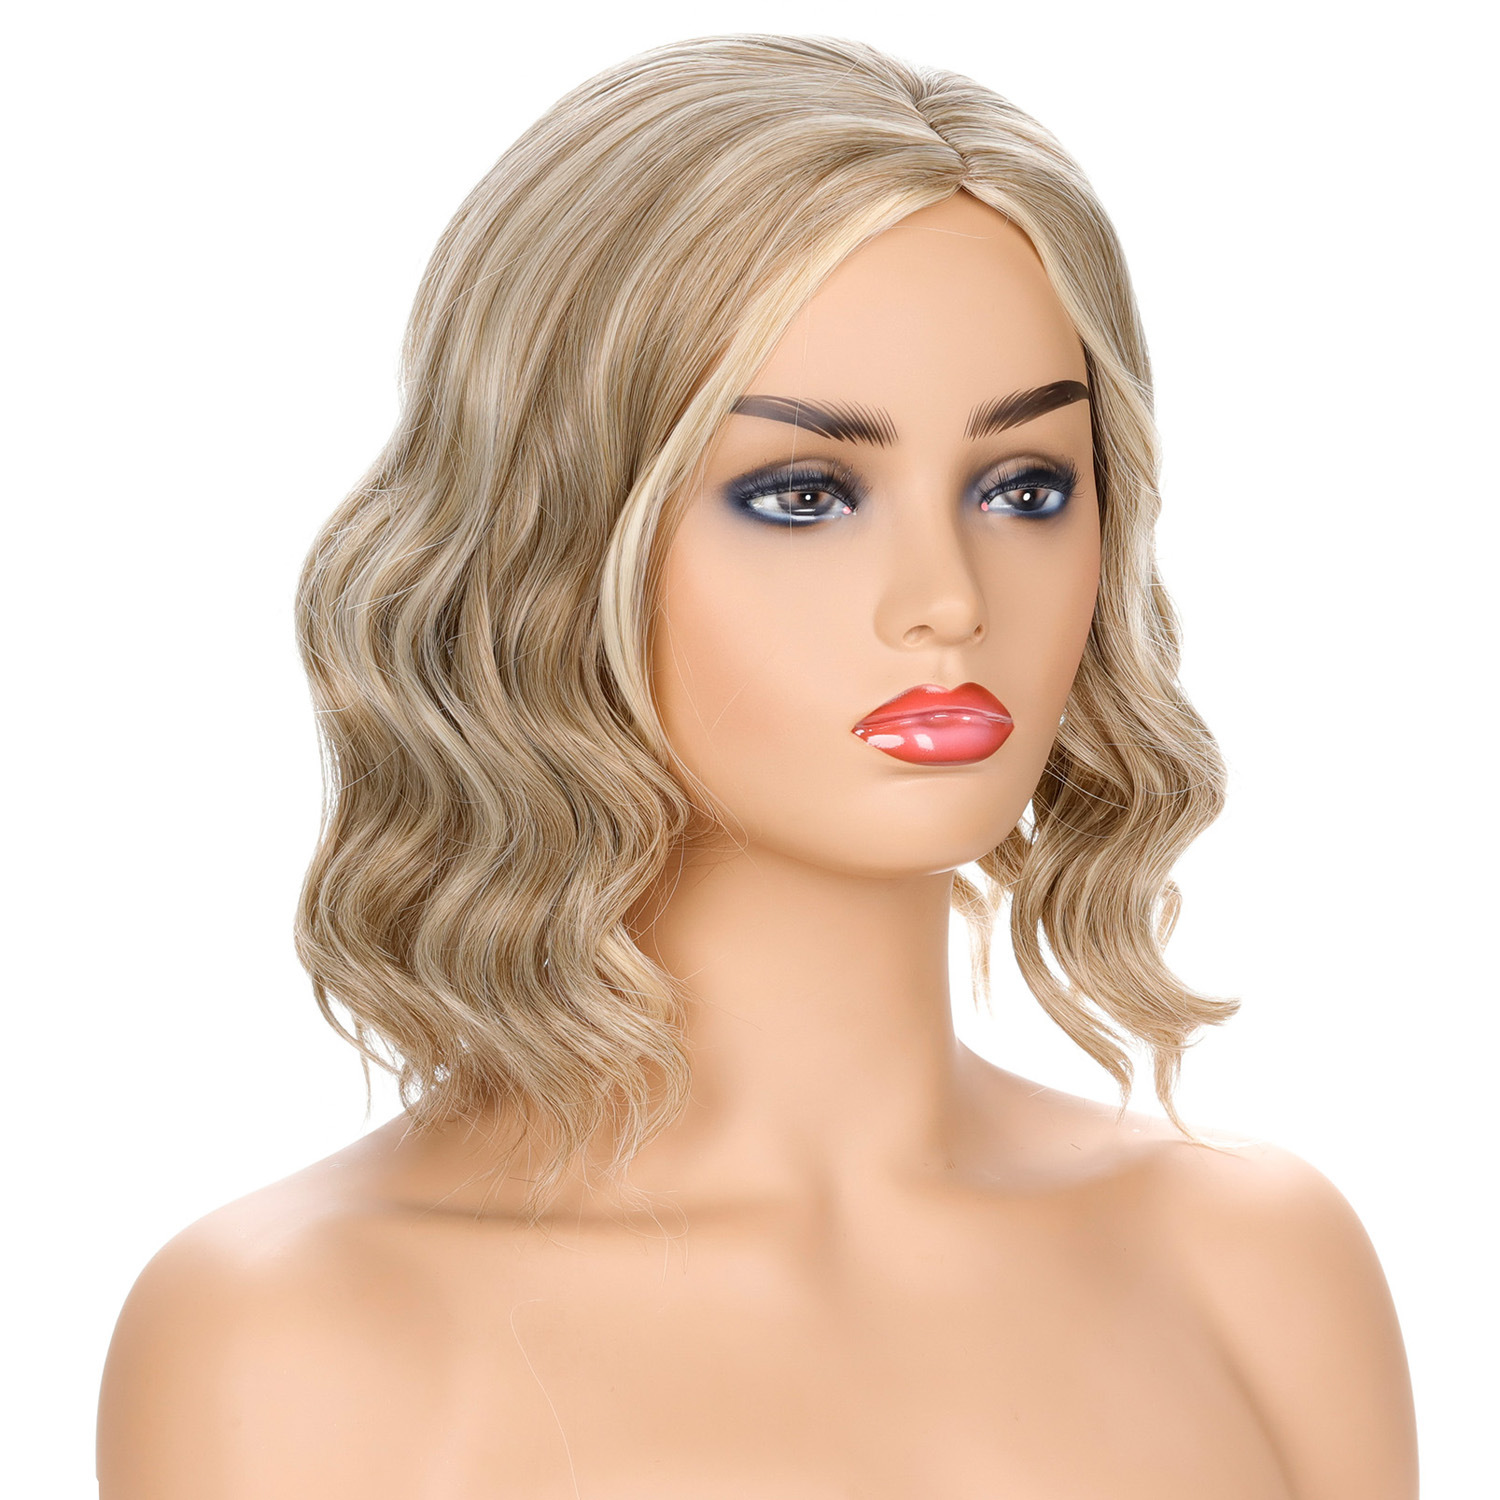 Fashionable blonde fashion synthetic wig with wavy curly hair and mid-part, perfect for women